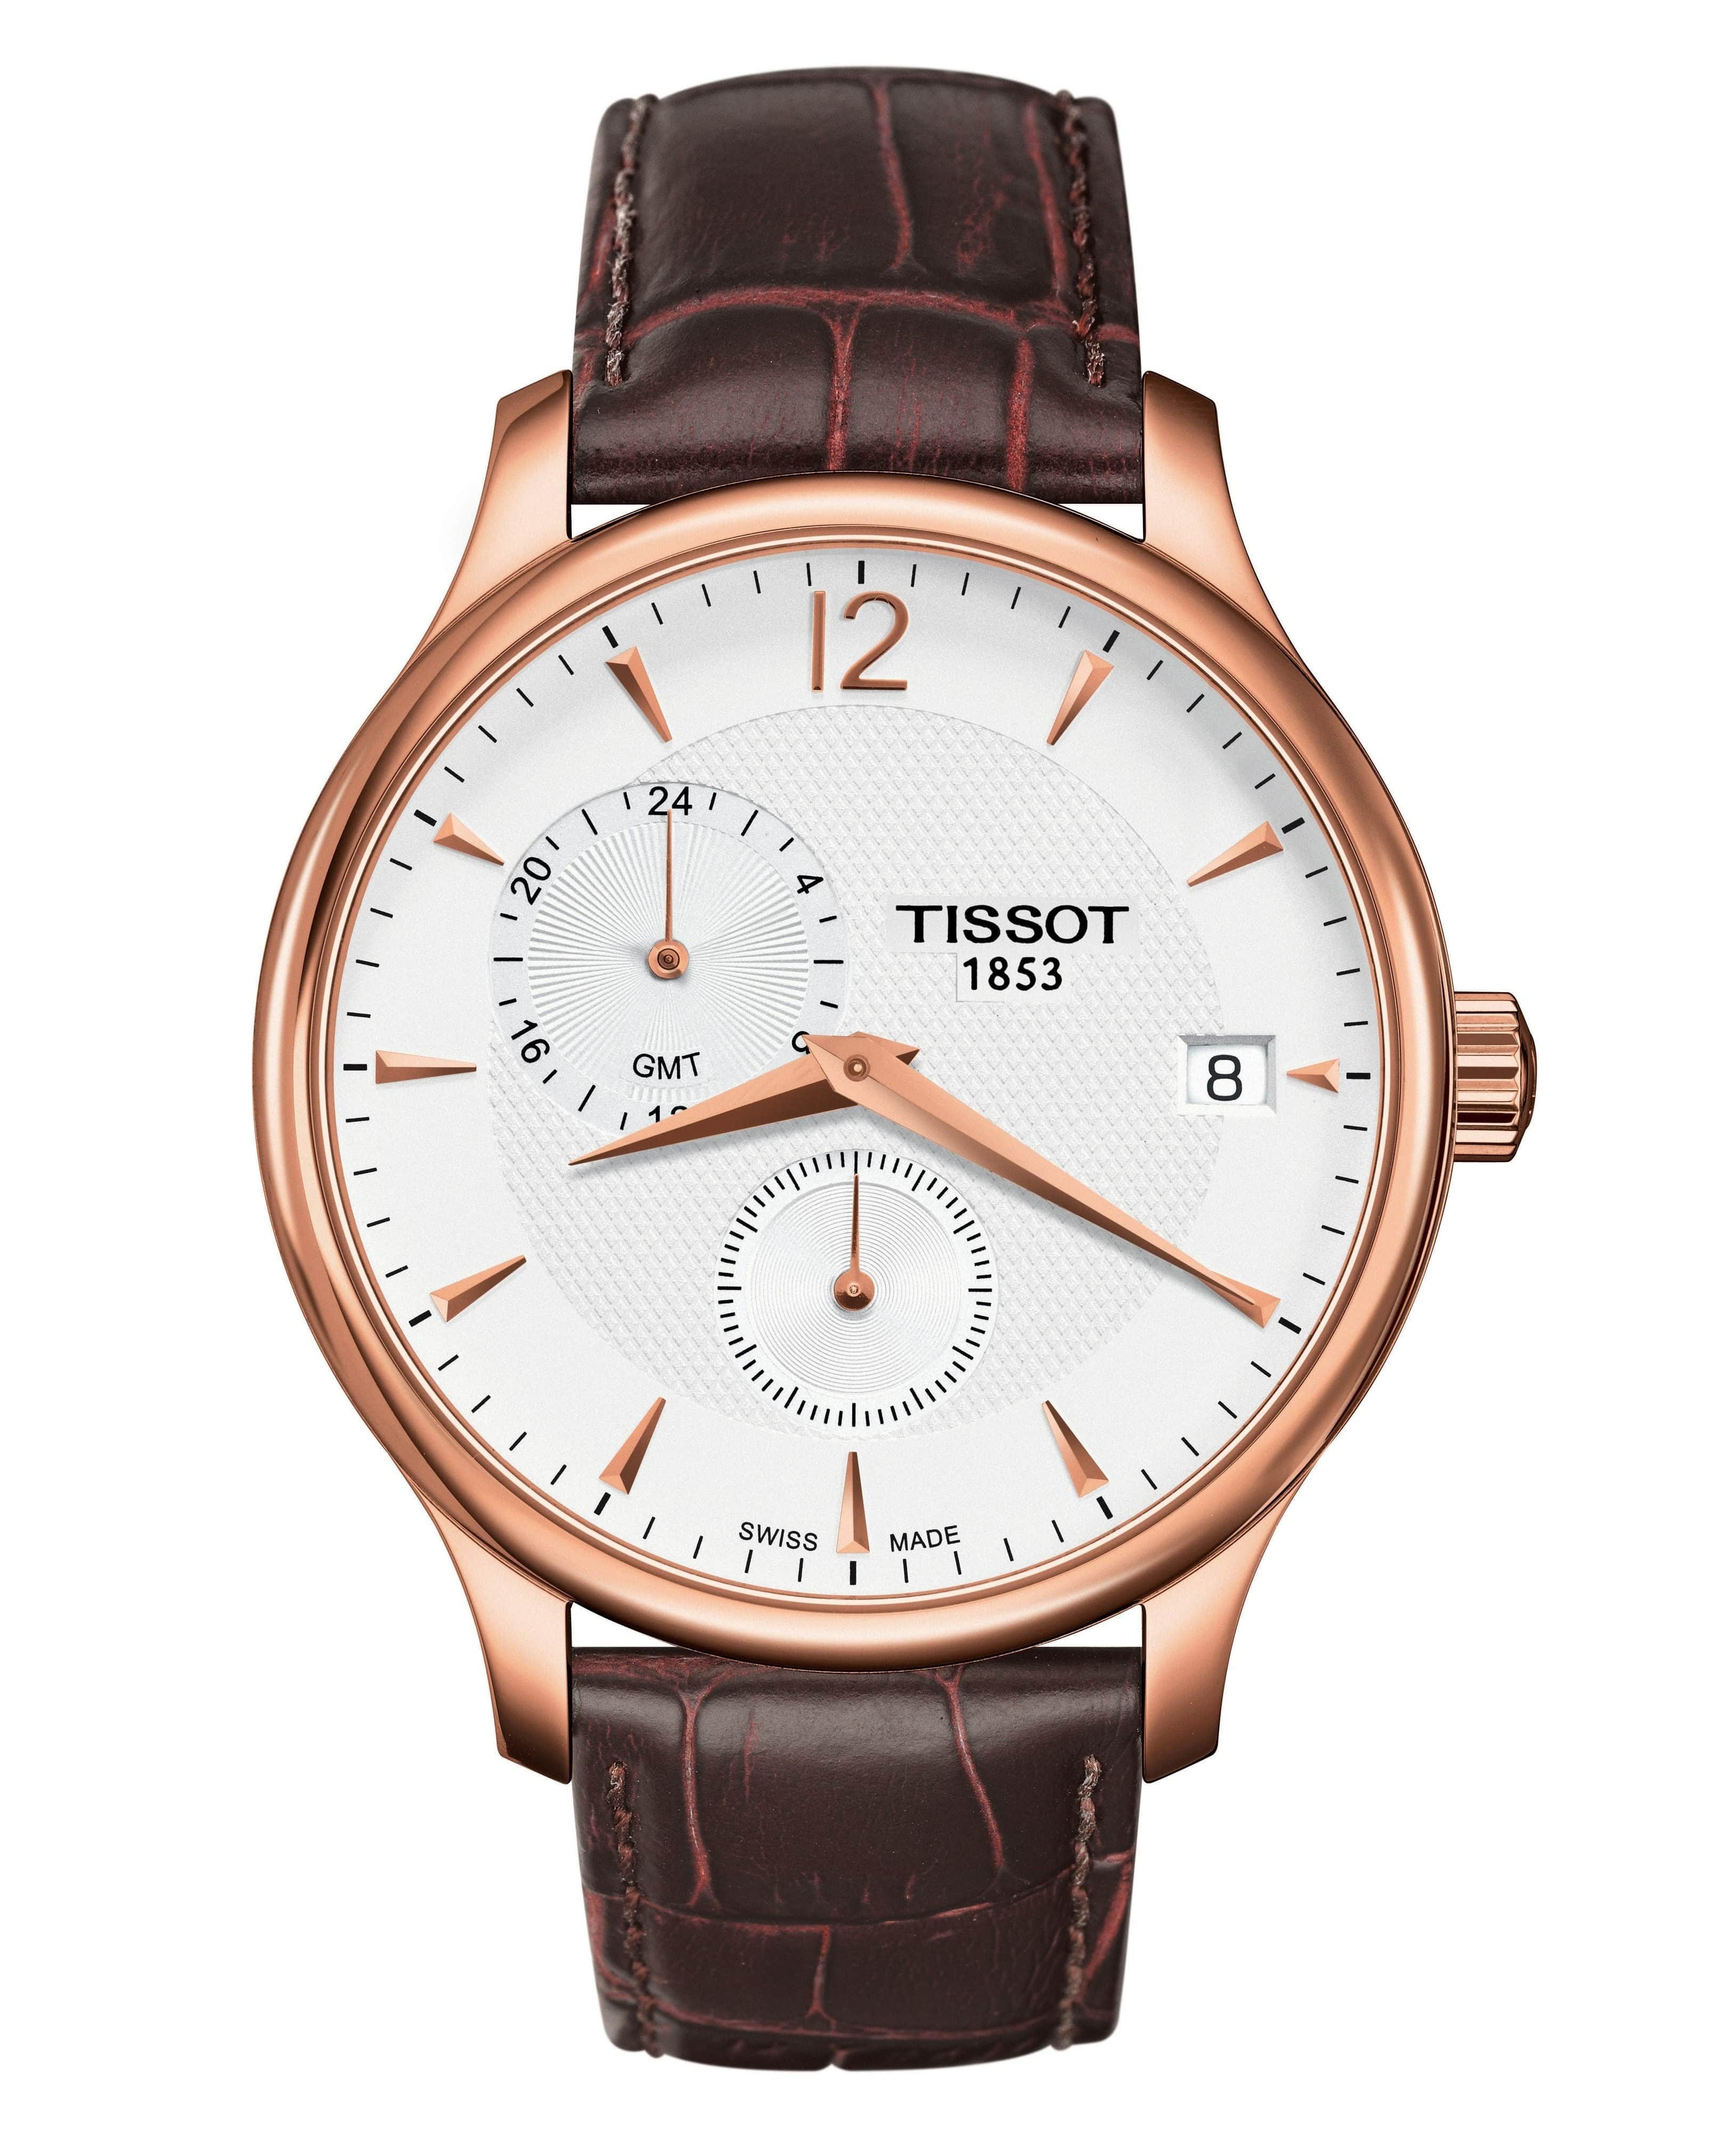 ĐỒNG HỒ NAM DÂY DA TISSOT TRADITION GMT ROSE GOLD LEATHER STRAP WATCH T063.639.36.037.00 10